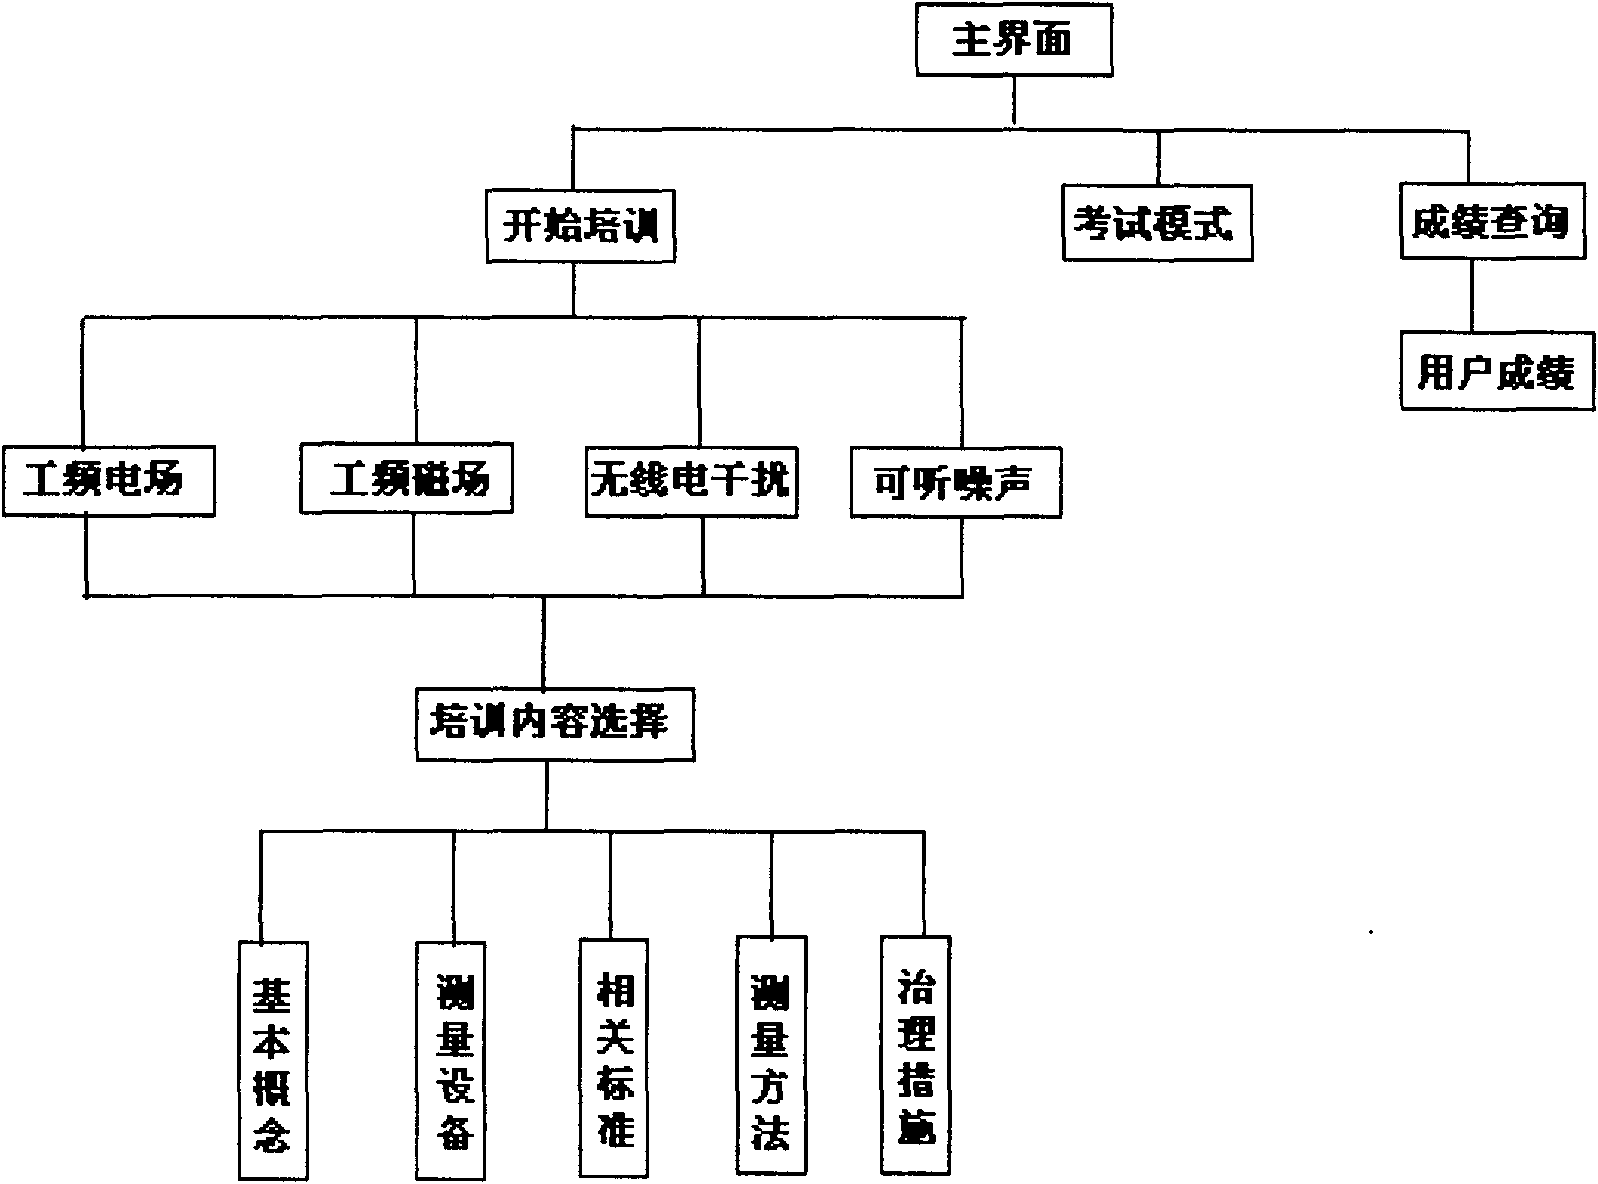 Electromagnetic environment emulation training and data management system and method thereof